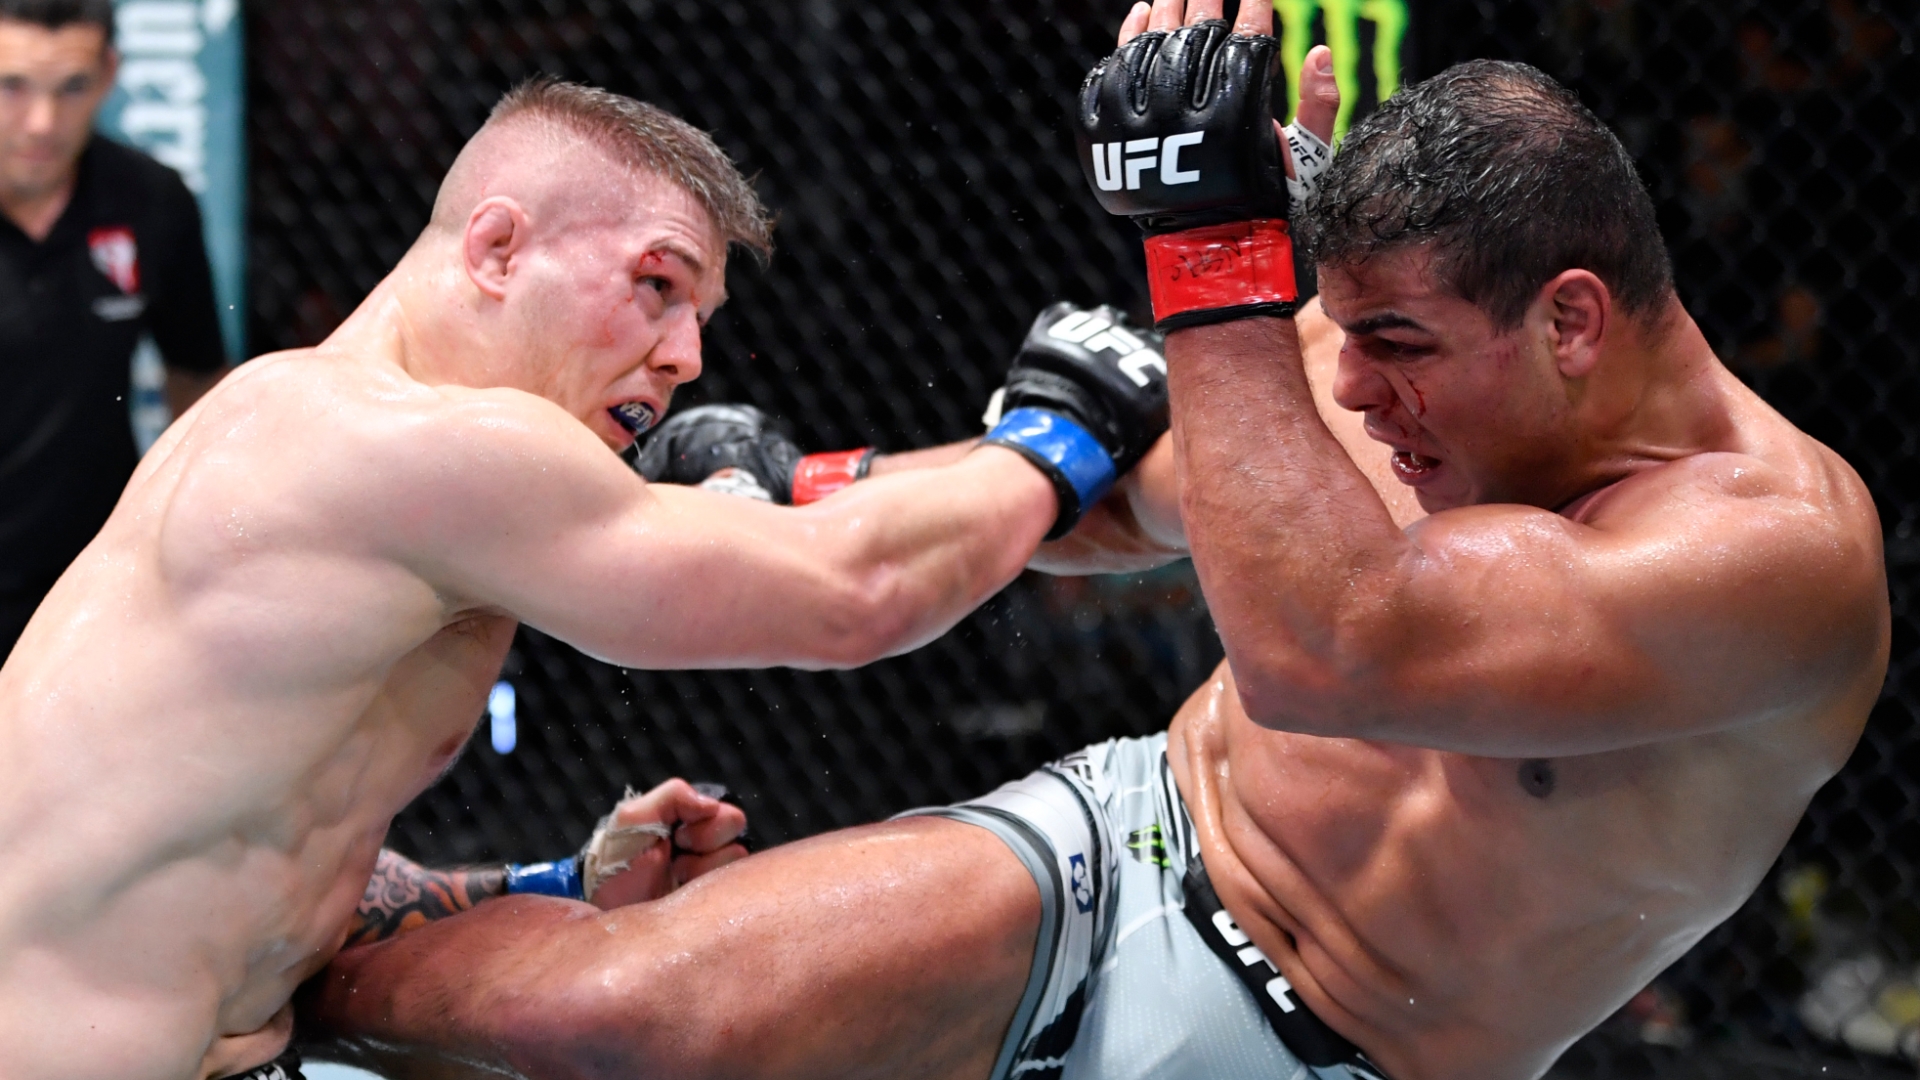 Paulo Costa, Marvin Vettori deliver fight full of bad blood and fireworks